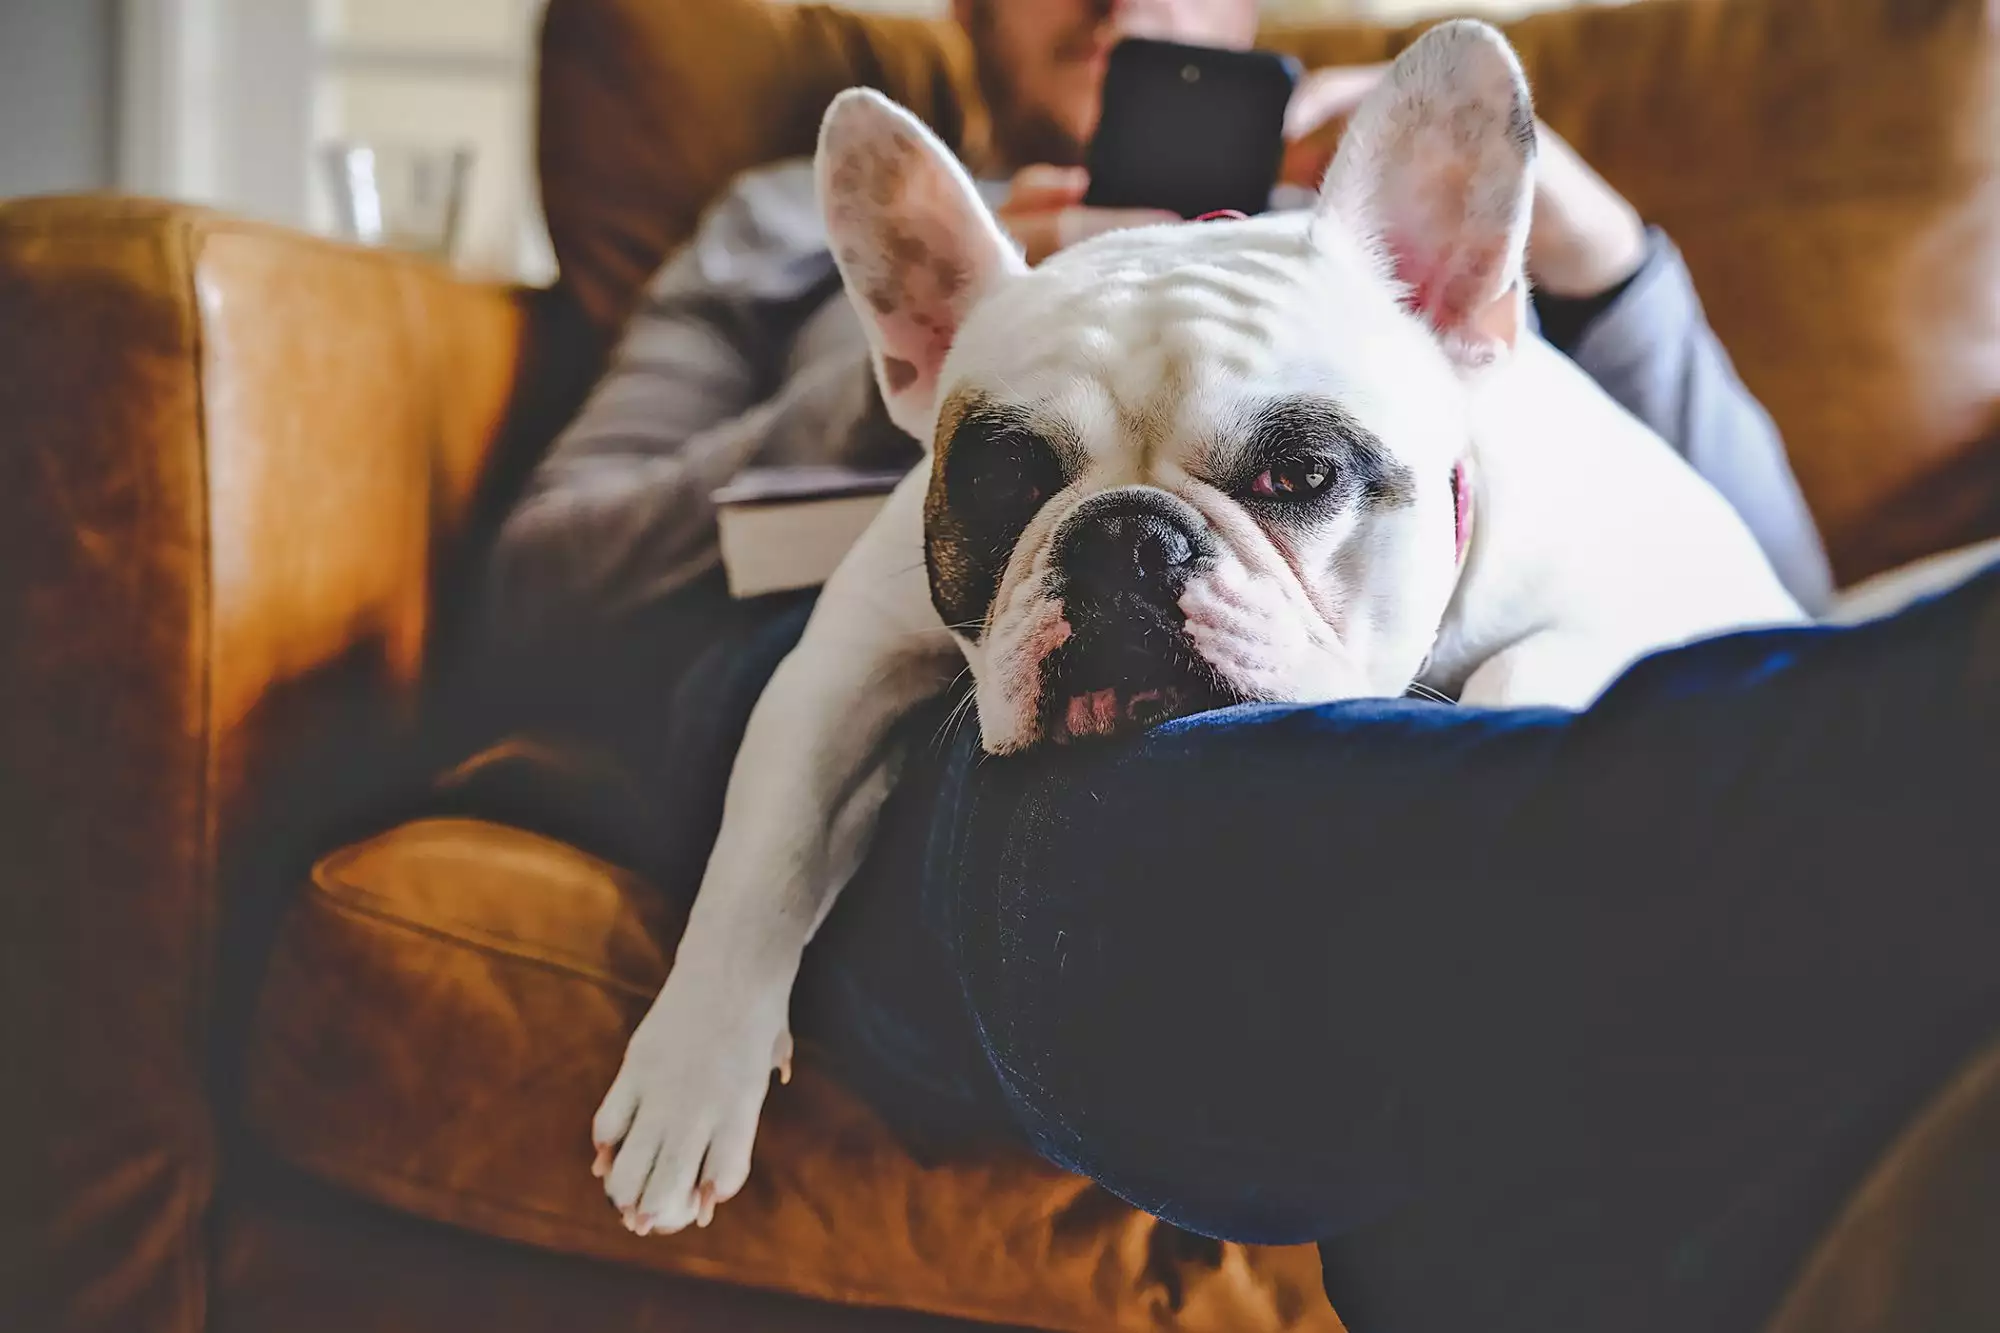 Top 10 Best Lap Dog Breeds for Cuddling on the Couch